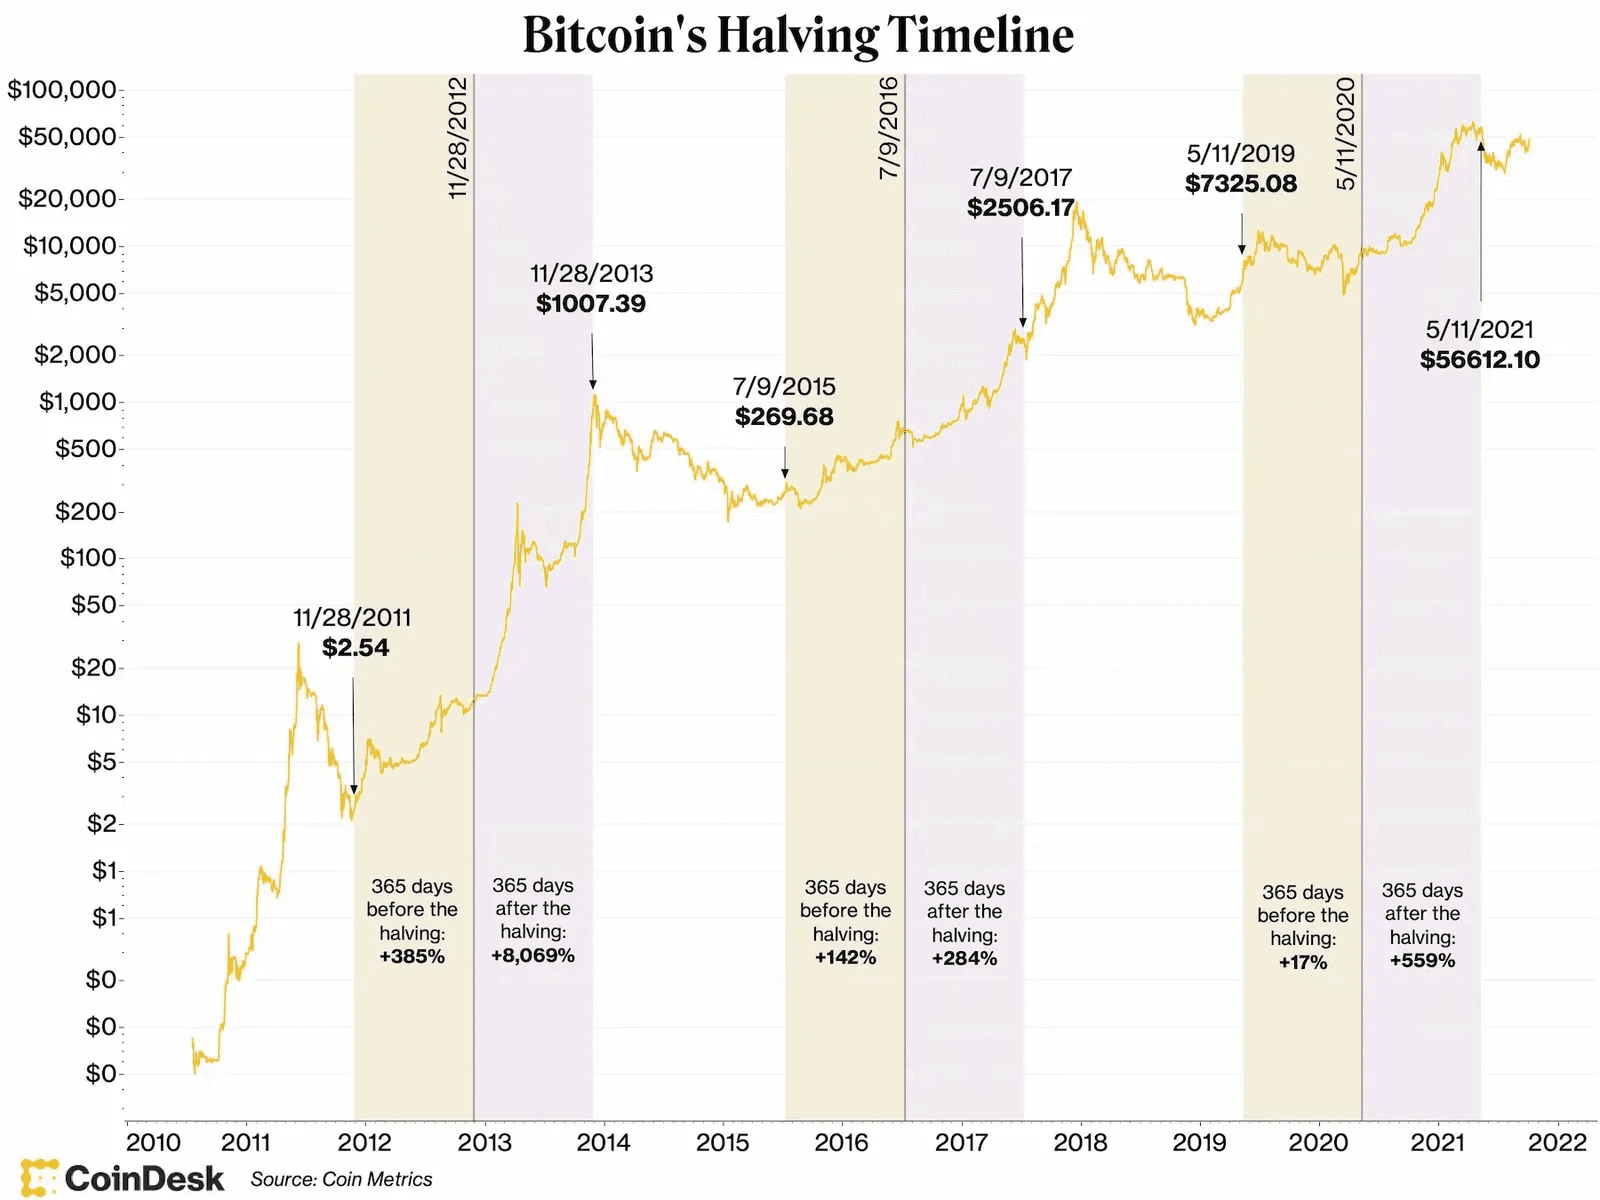 ChatGPT Prediction for Bitcoin Price Before and After Halving